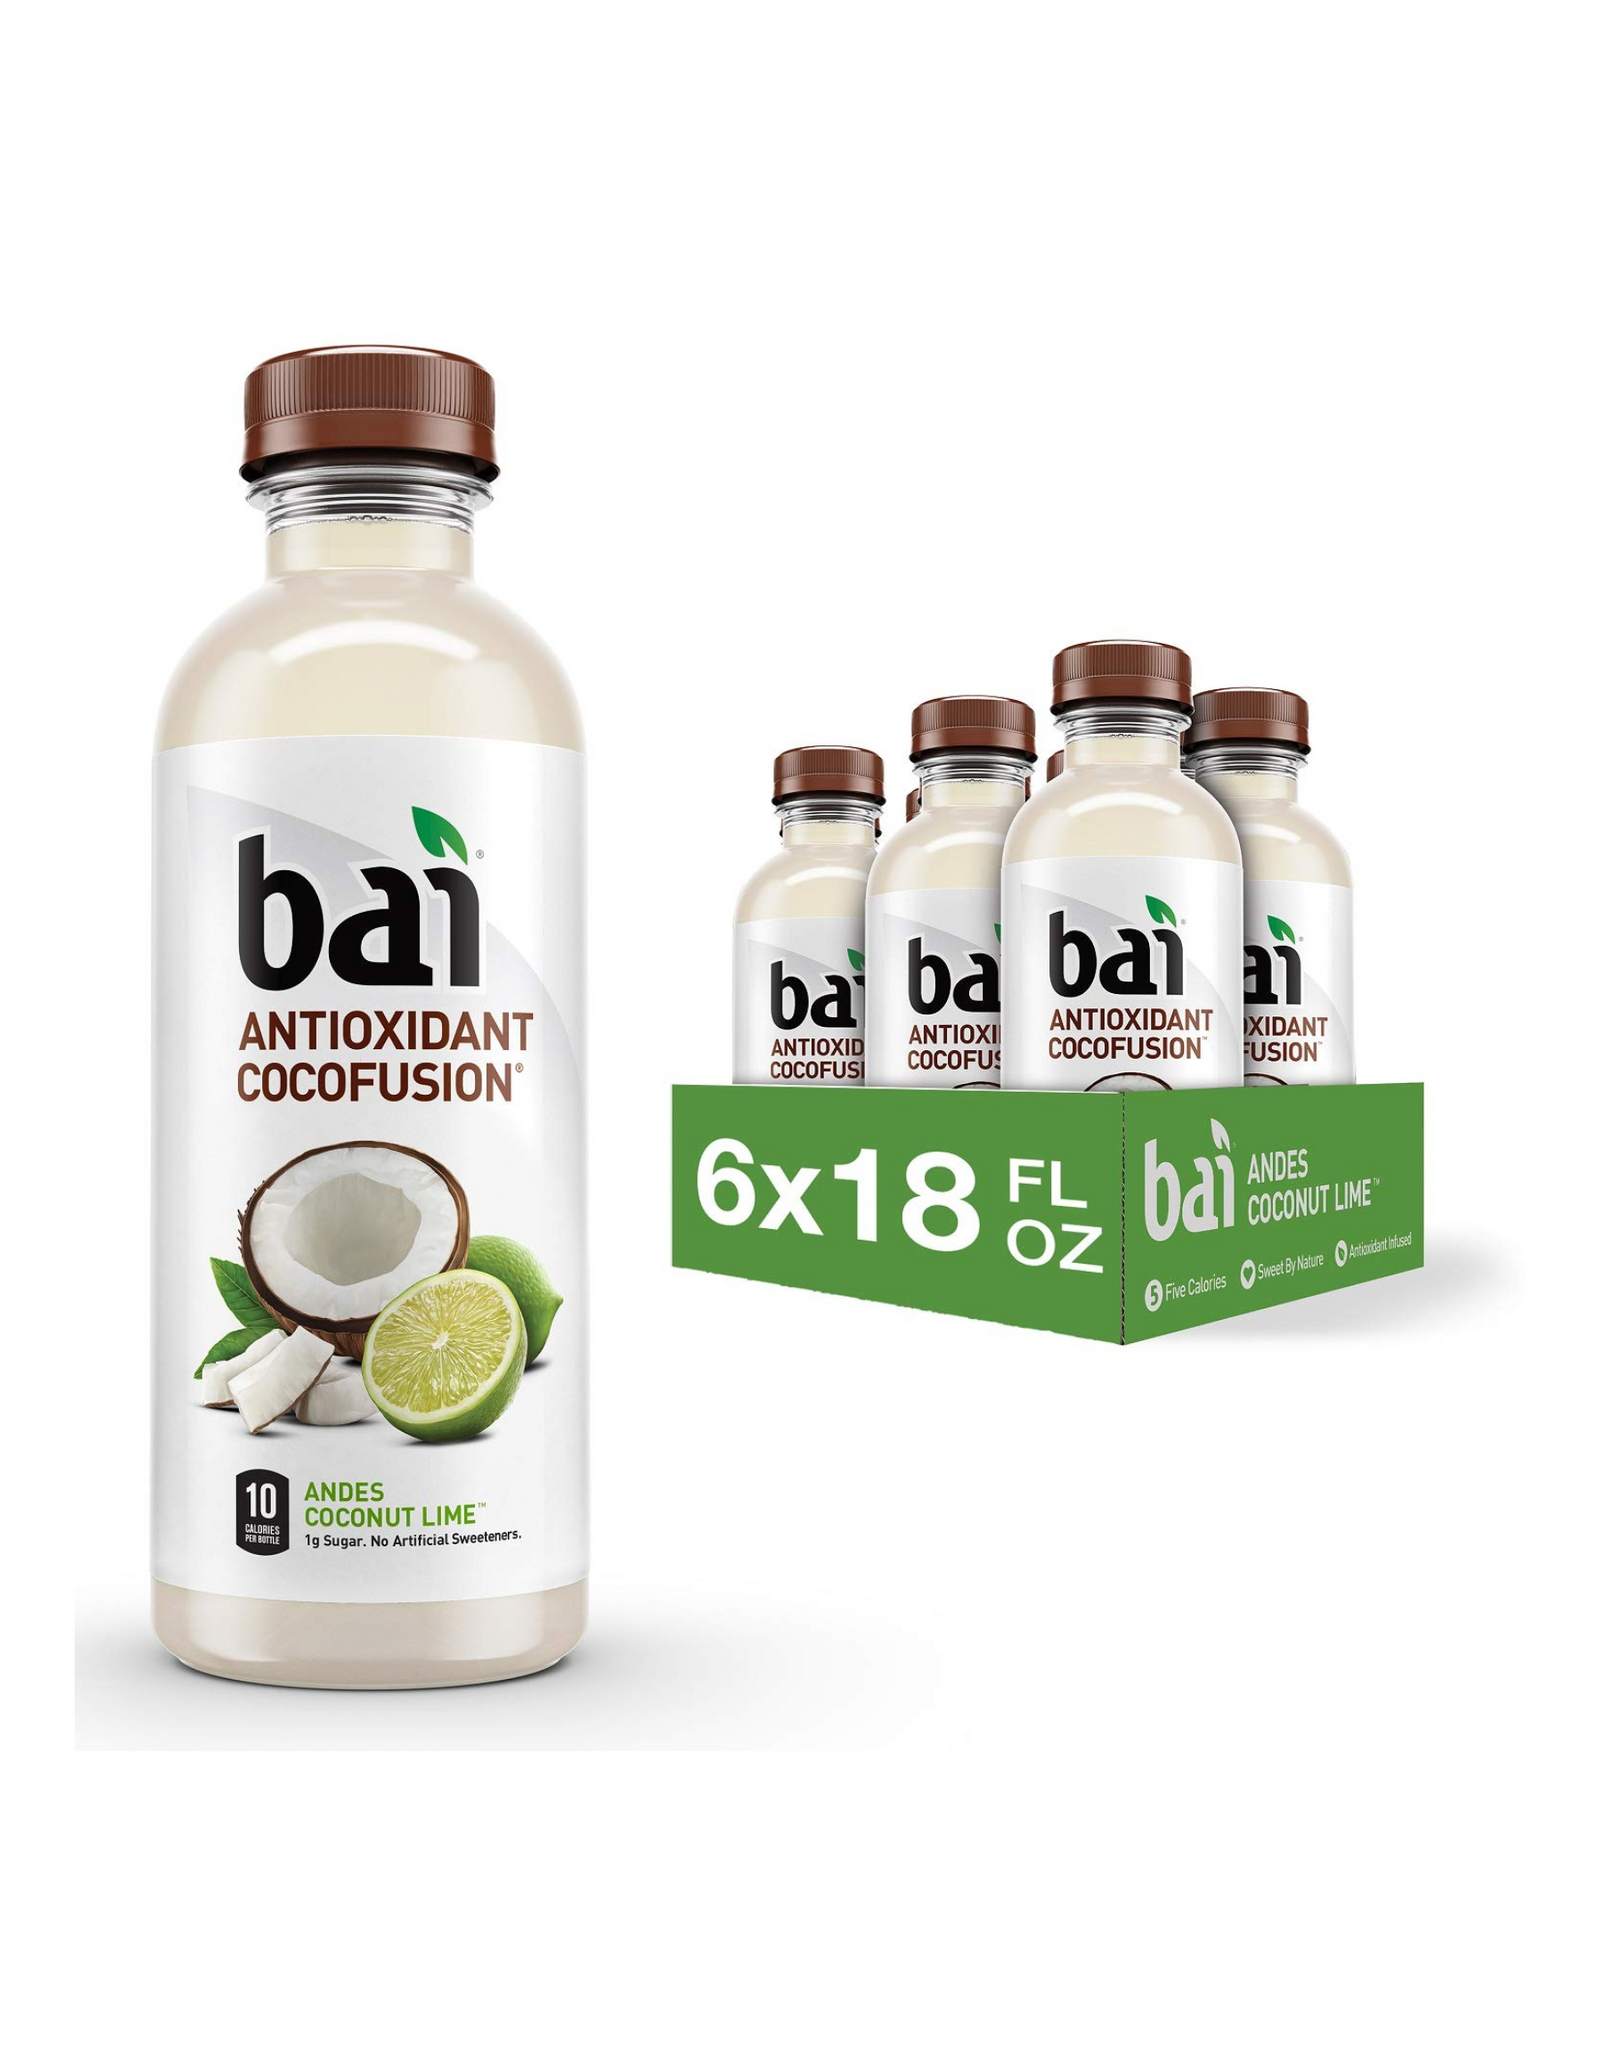 Bai Coconut Flavored Water, Antioxidant Cocofusion, Andes Coconut Lime, 108 fl oz (Pack of 6)